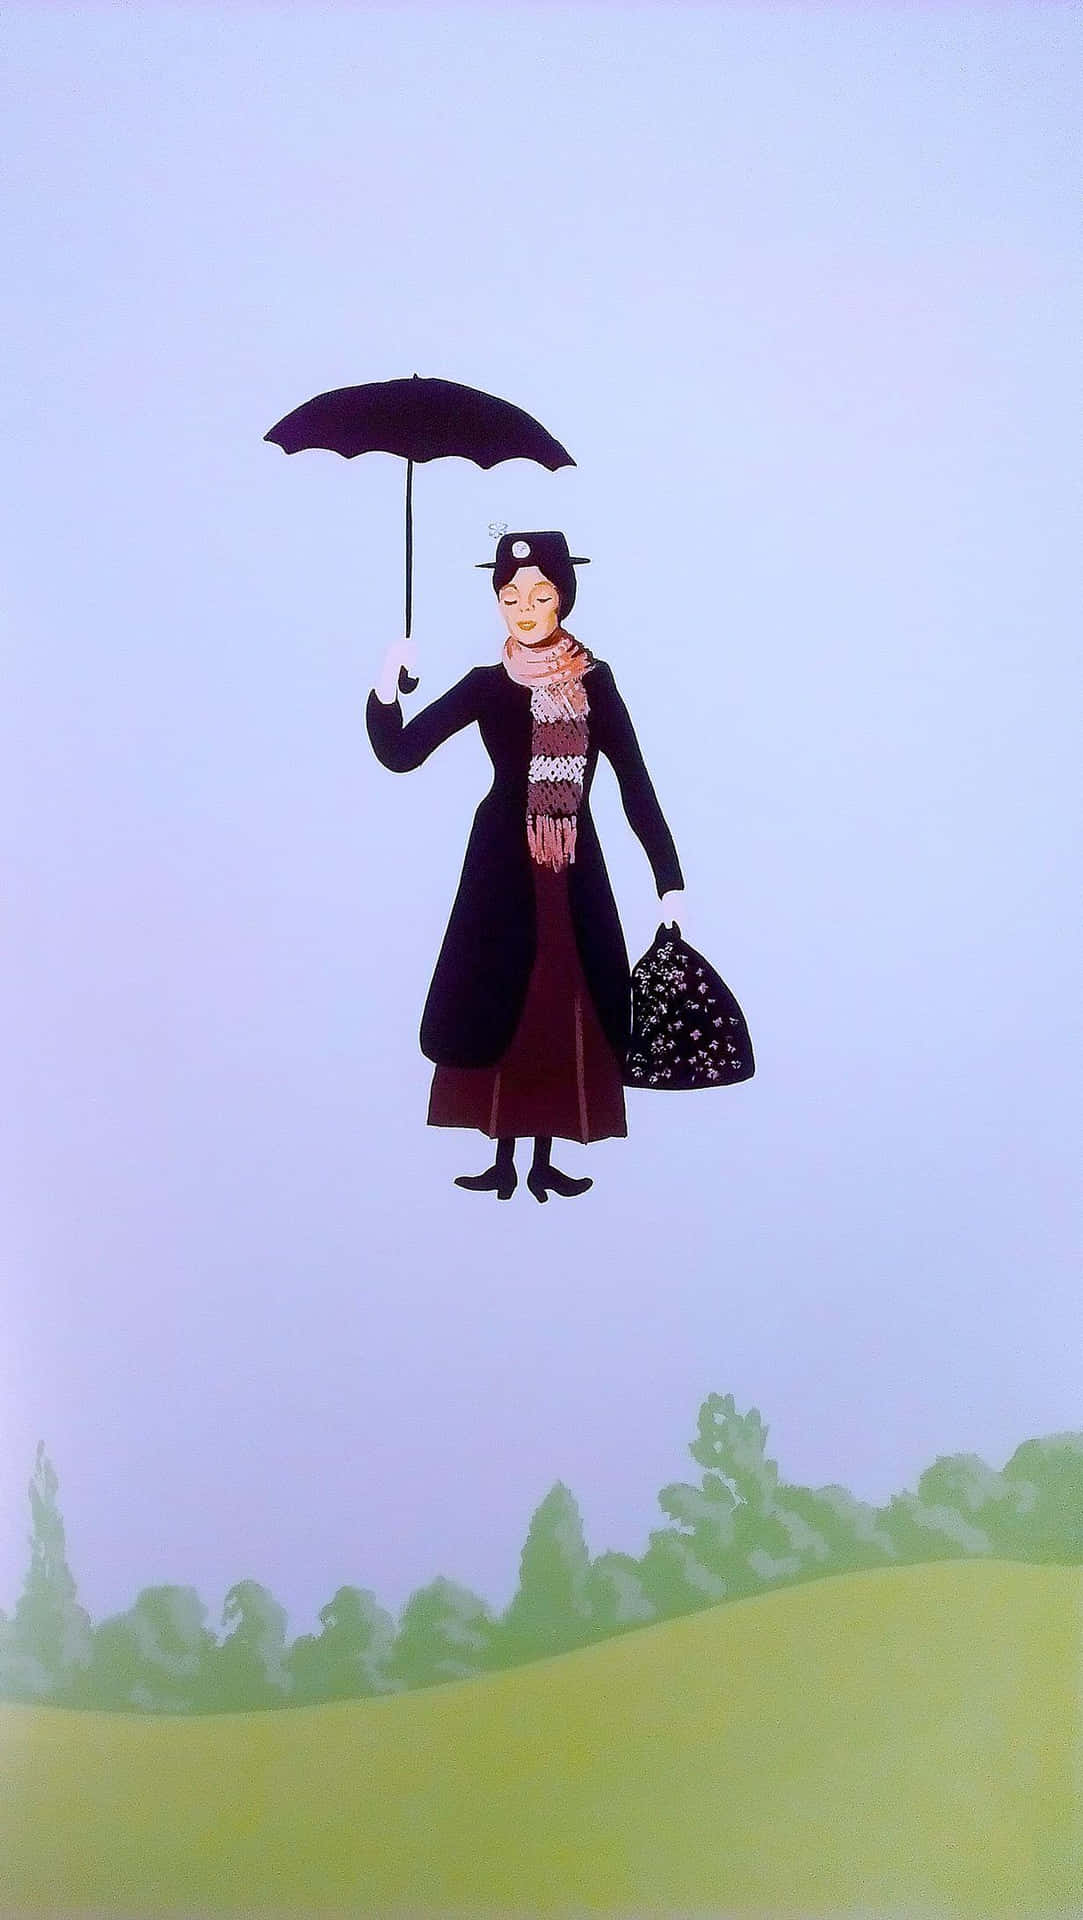 Enchanting Mary Poppins Flies High in the Sky Wallpaper